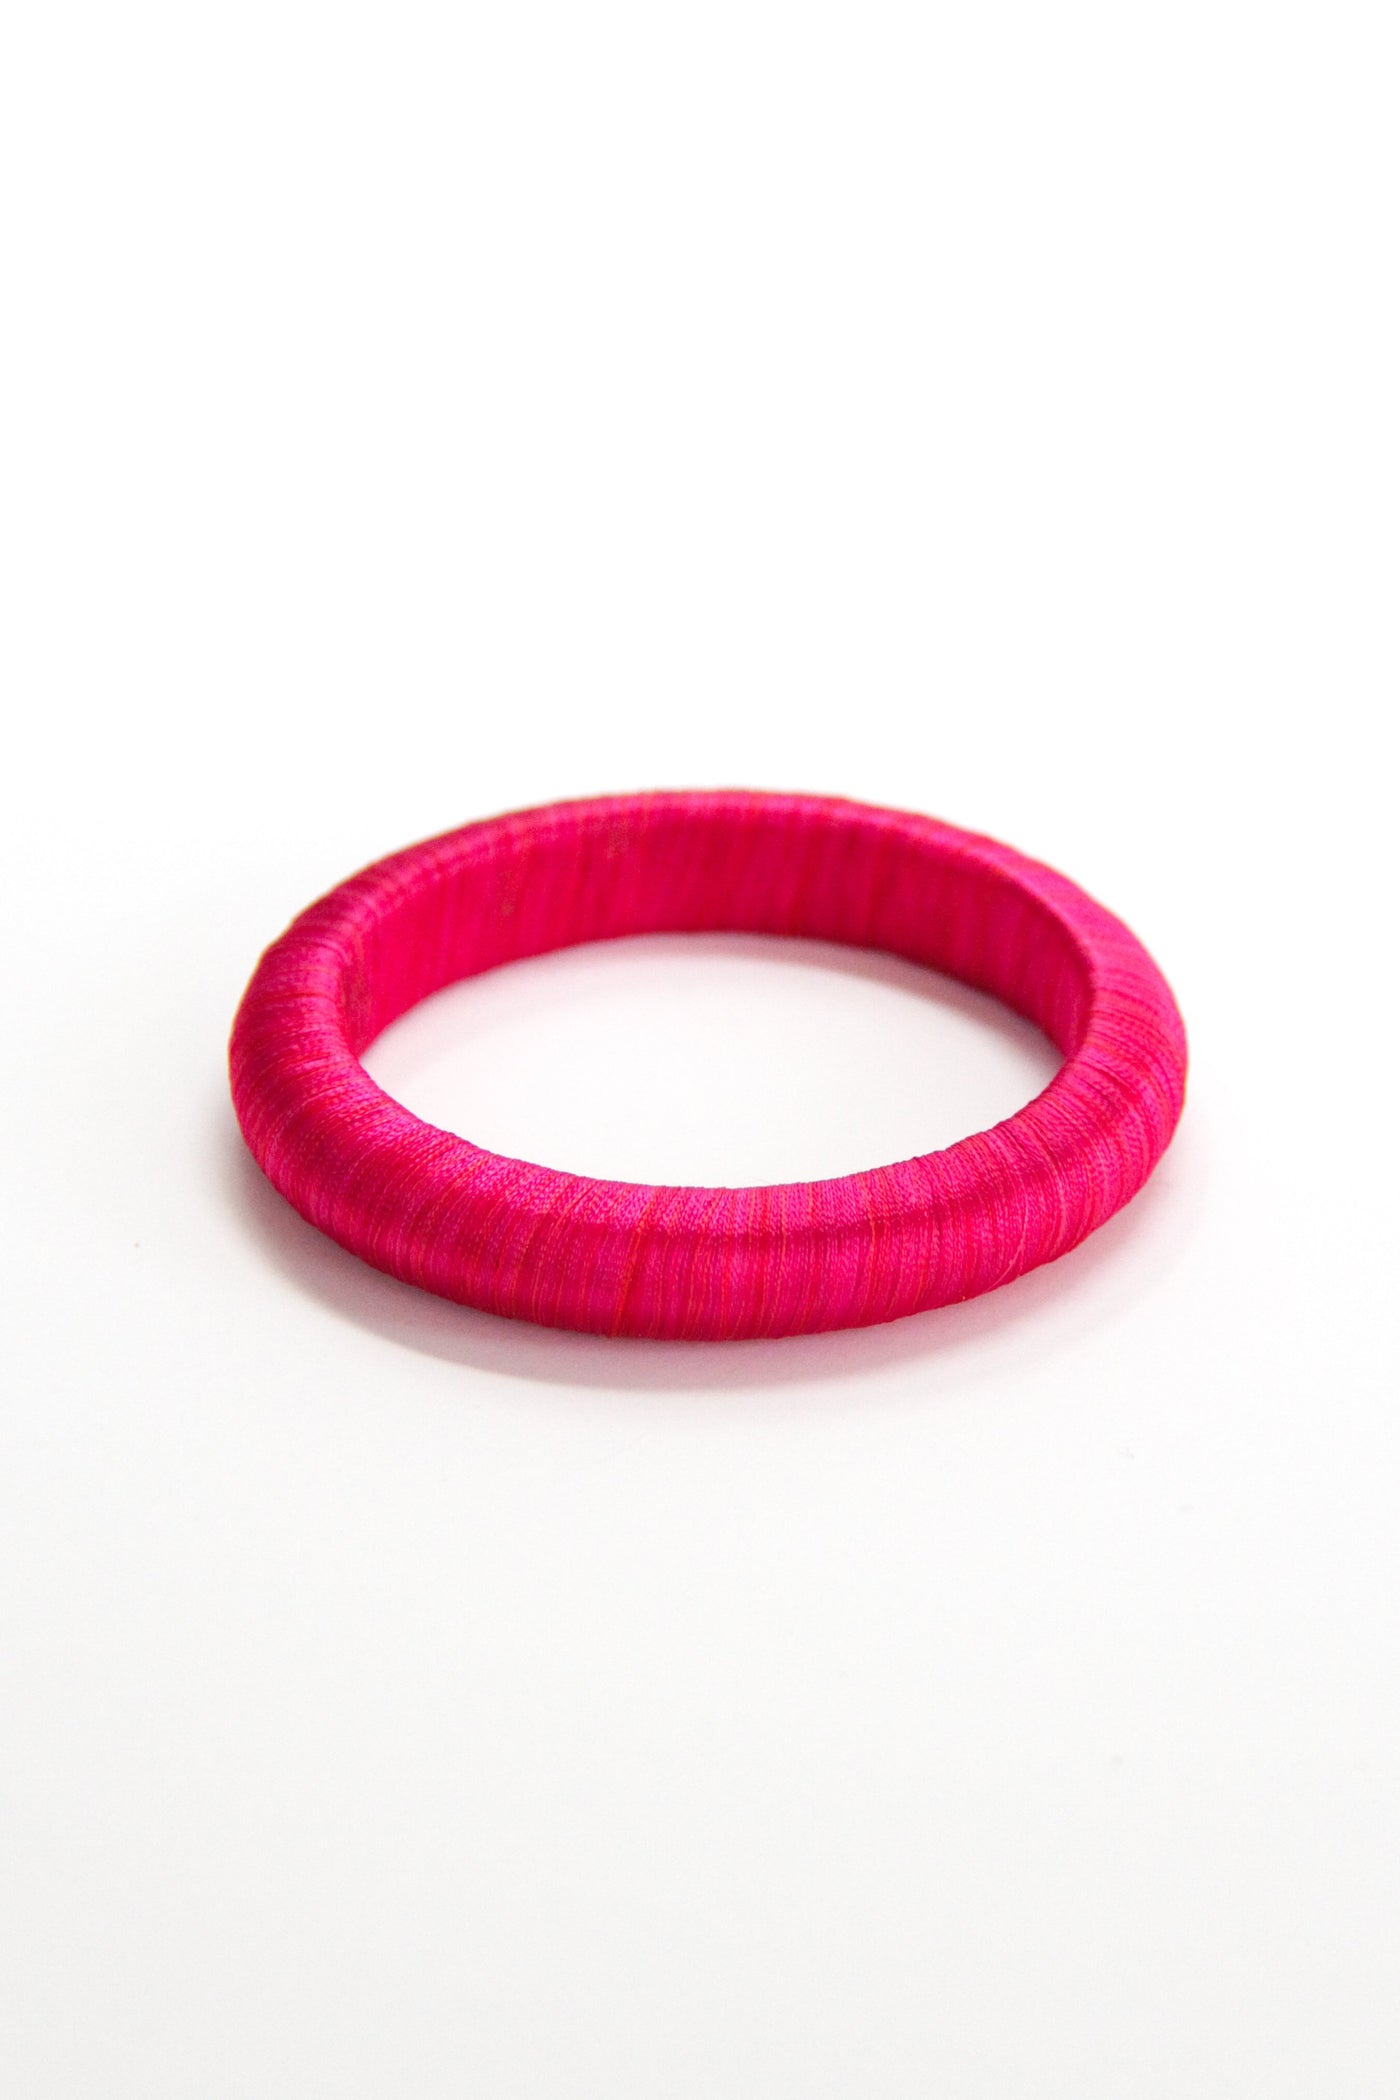 Threaded Bangle in Beetroot